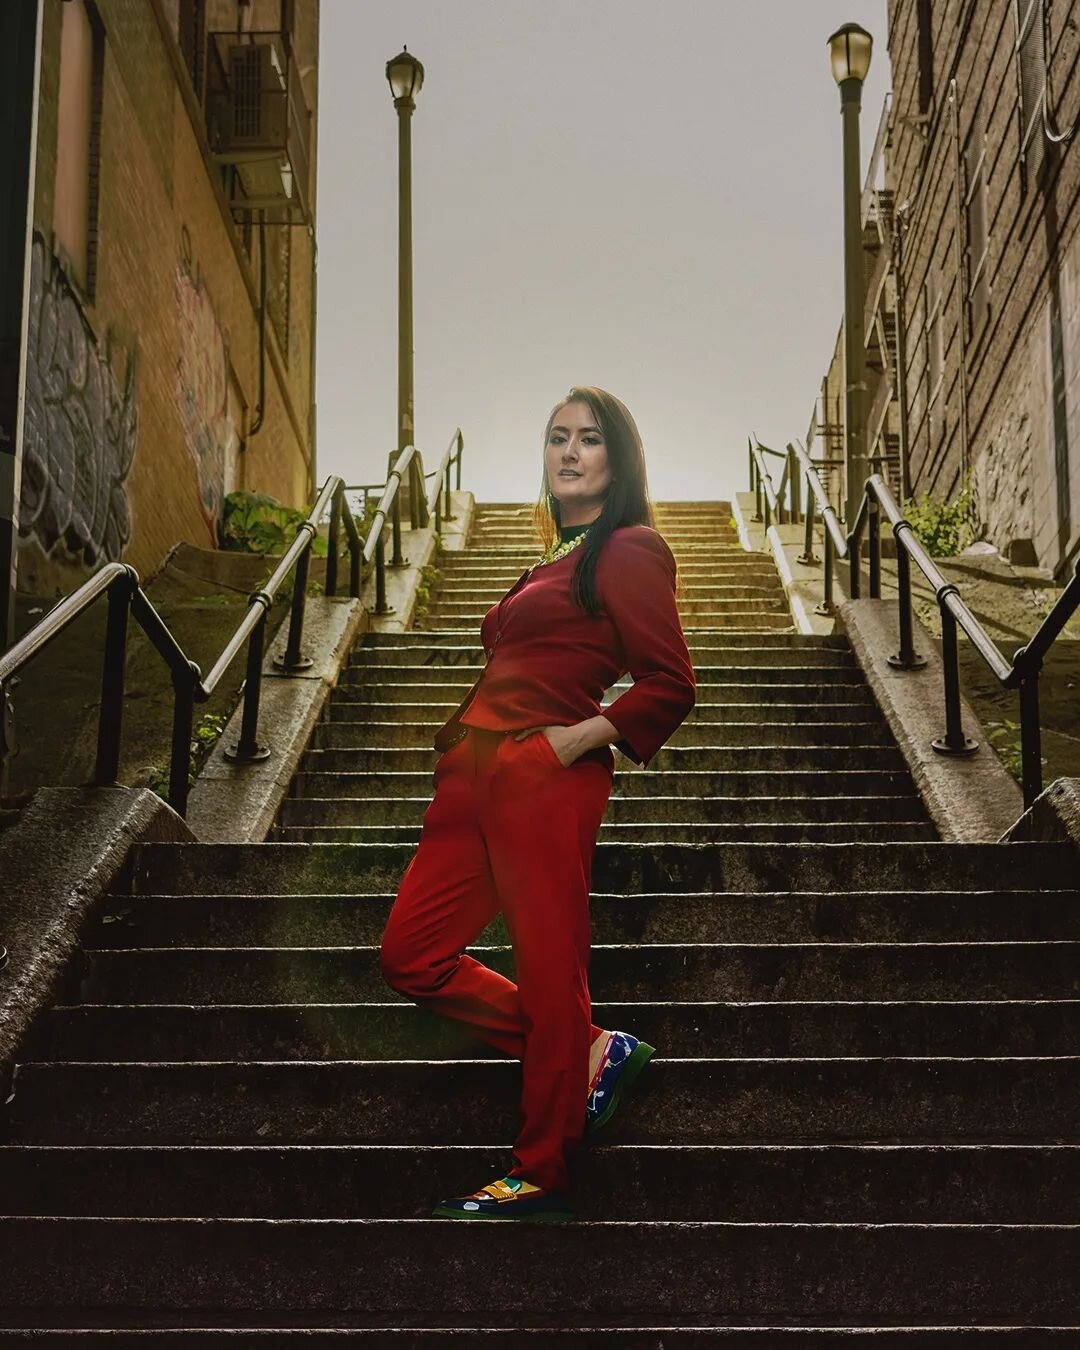 Just clowning around while helping @niredonahue shoot her reel. 🤡 Look at those shoes!

Swipe to the end to see it from start to finish ➡️
.
.
.
#portraits #portrait #portraitphotography #stairs #shakespearesteps #bronx #newyork #newyorkcity #ny #ny